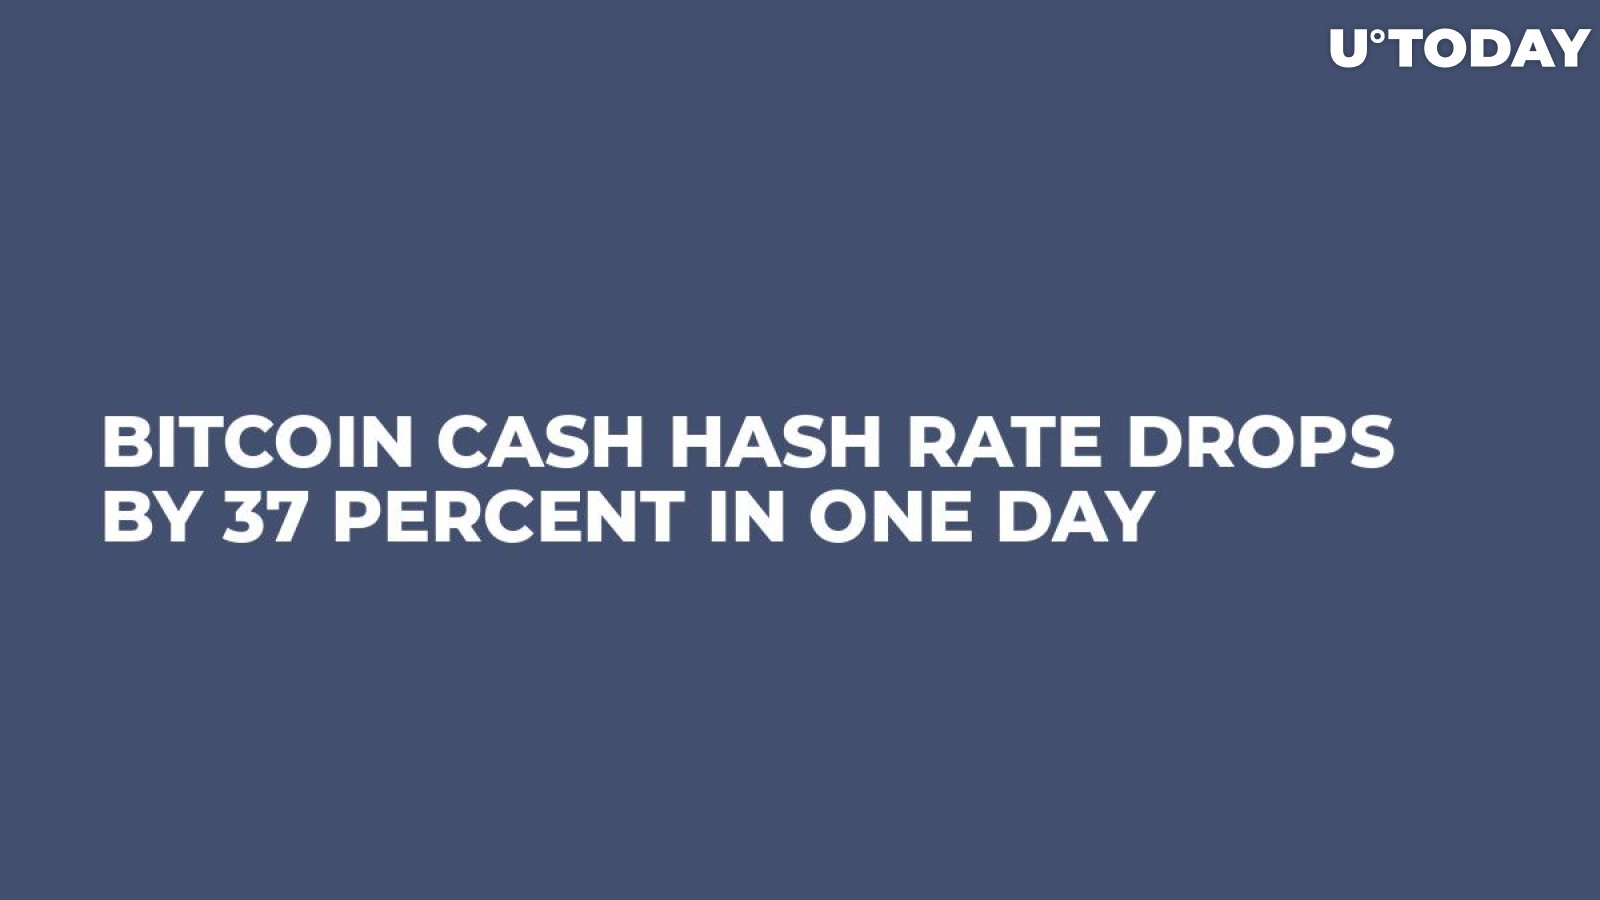 Bitcoin Cash Hash Rate Drops By 37 Percent in One Day